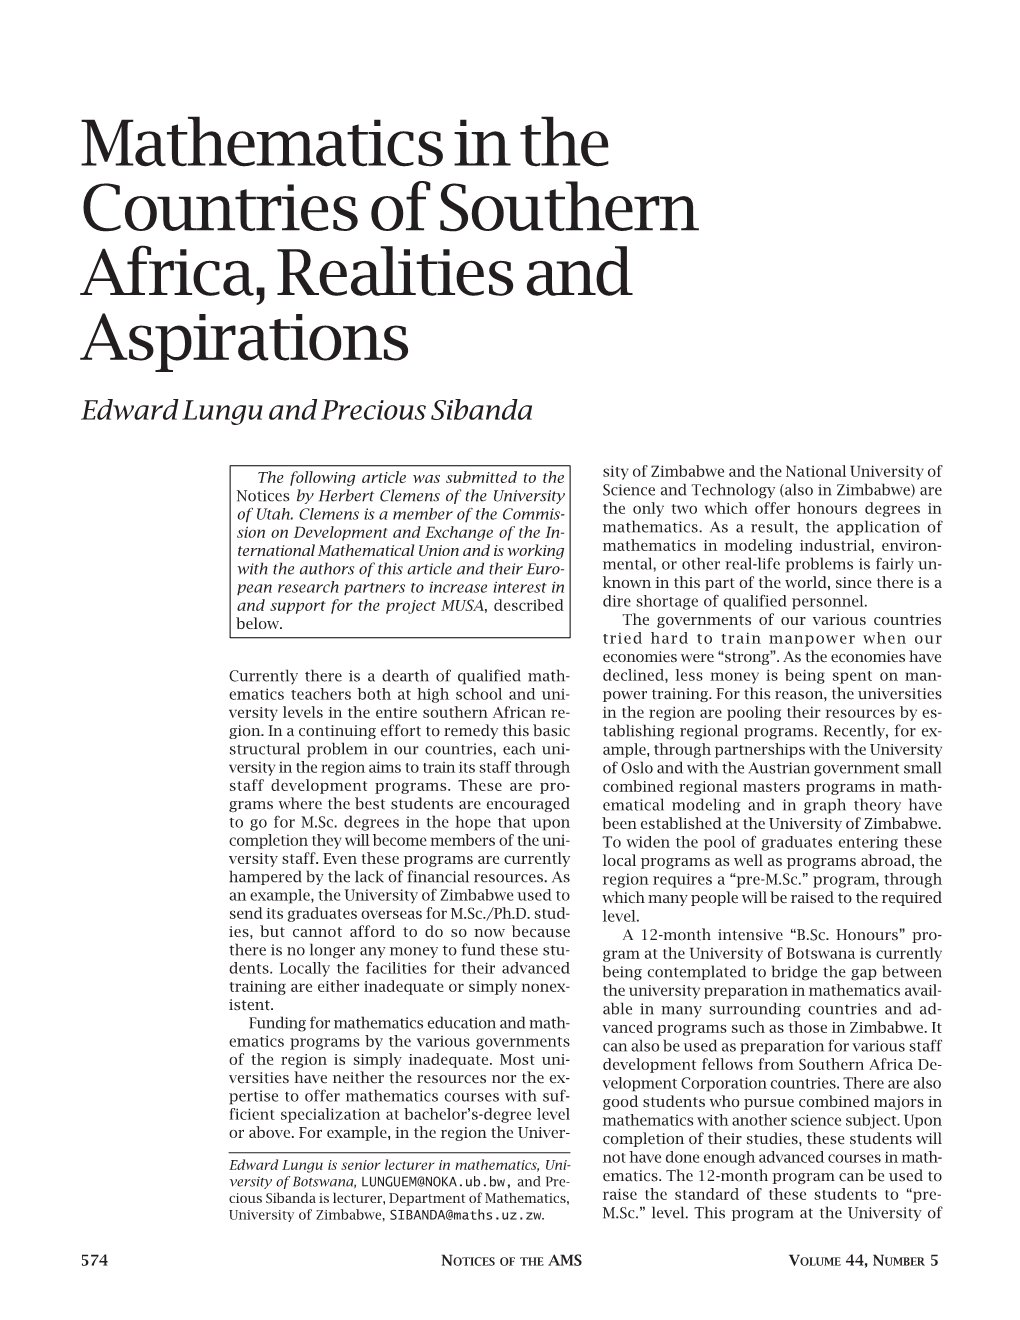 Mathematics in the Countries of Southern Africa, Realities and Aspirations Edward Lungu and Precious Sibanda